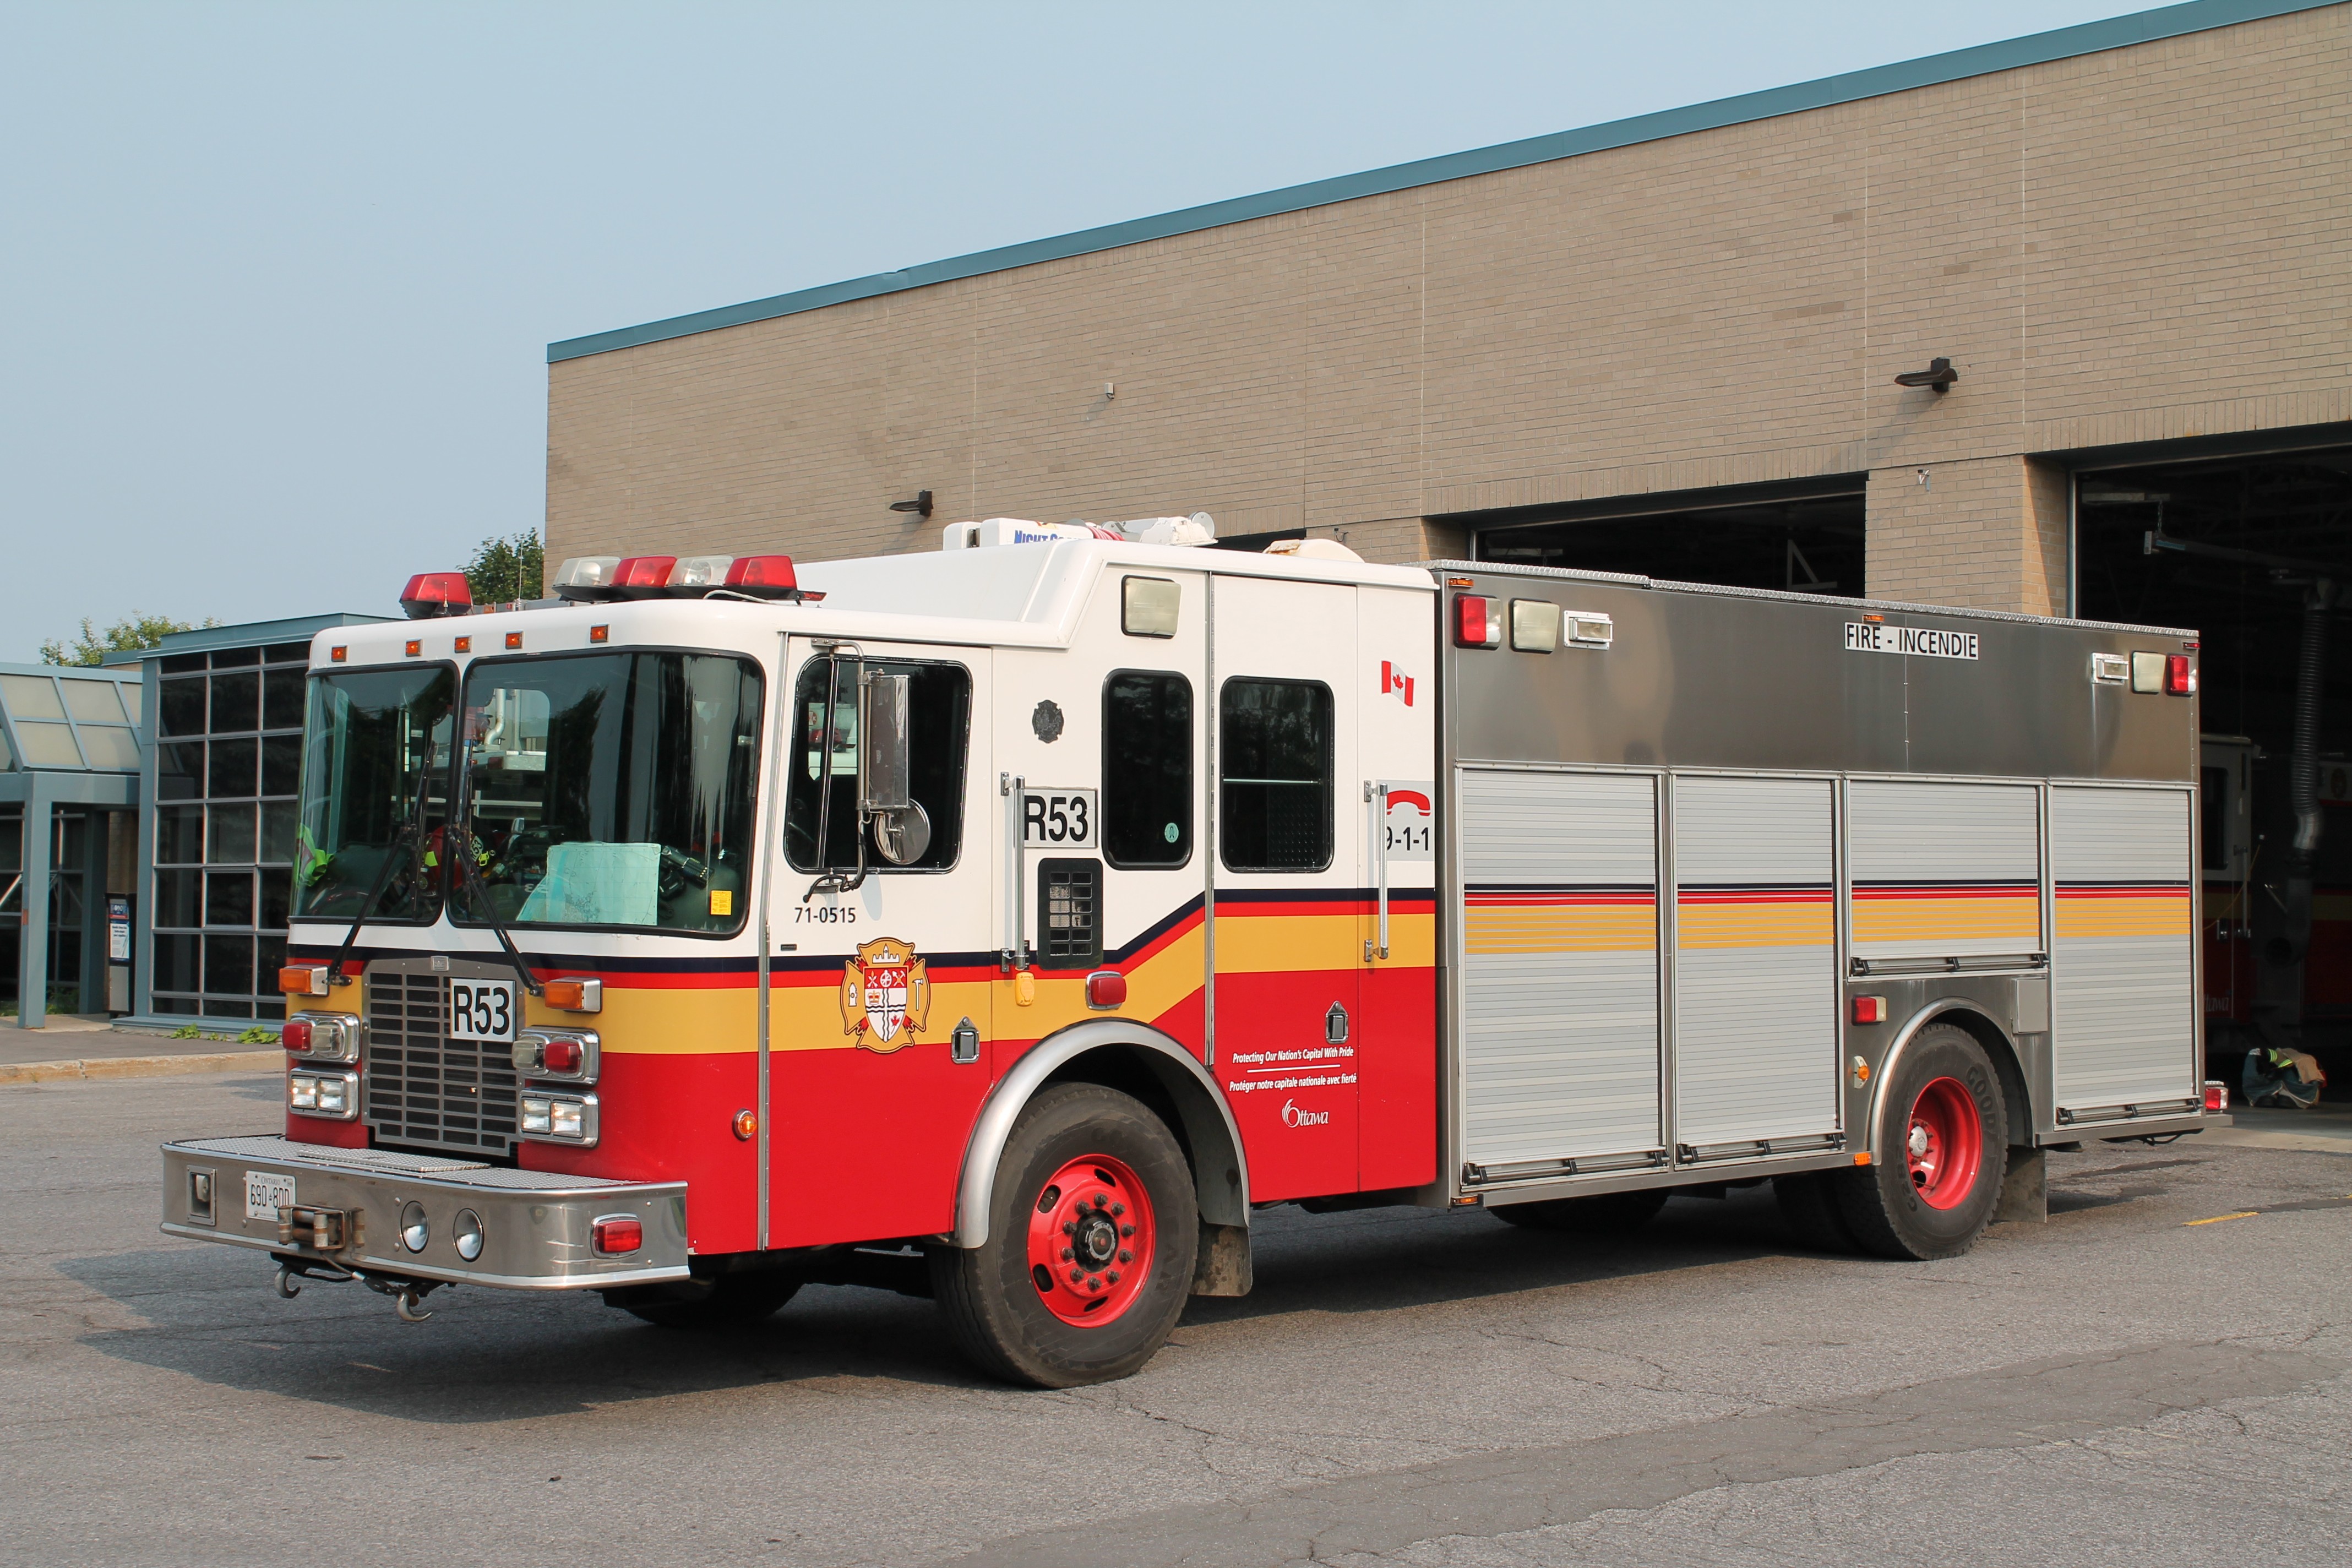 2005 M2 106 Freightliner Air Management Unit Ottawa Fire Services Firefighting Wiki Of 2005 M2 106 Freightliner Air Management Unit